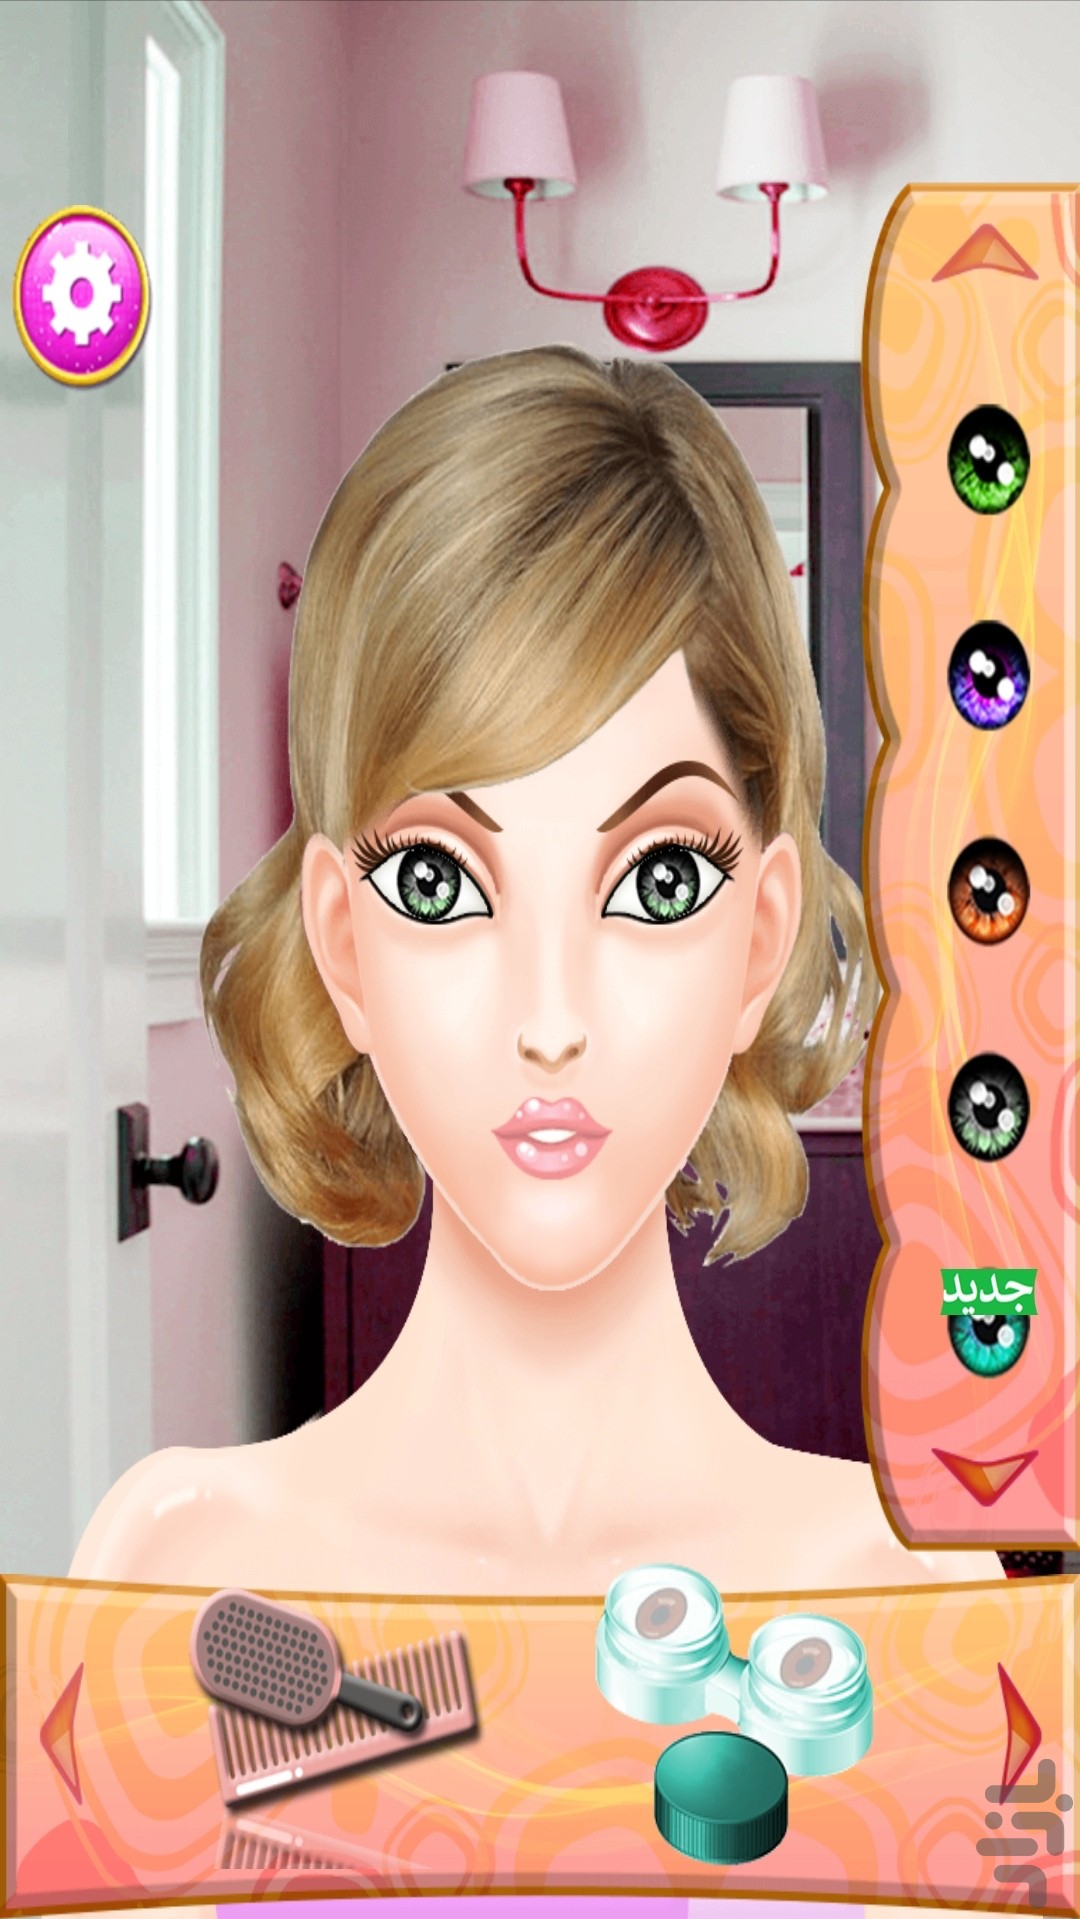 Girly Games Iranian Barbie Download Install Android Apps Cafe 